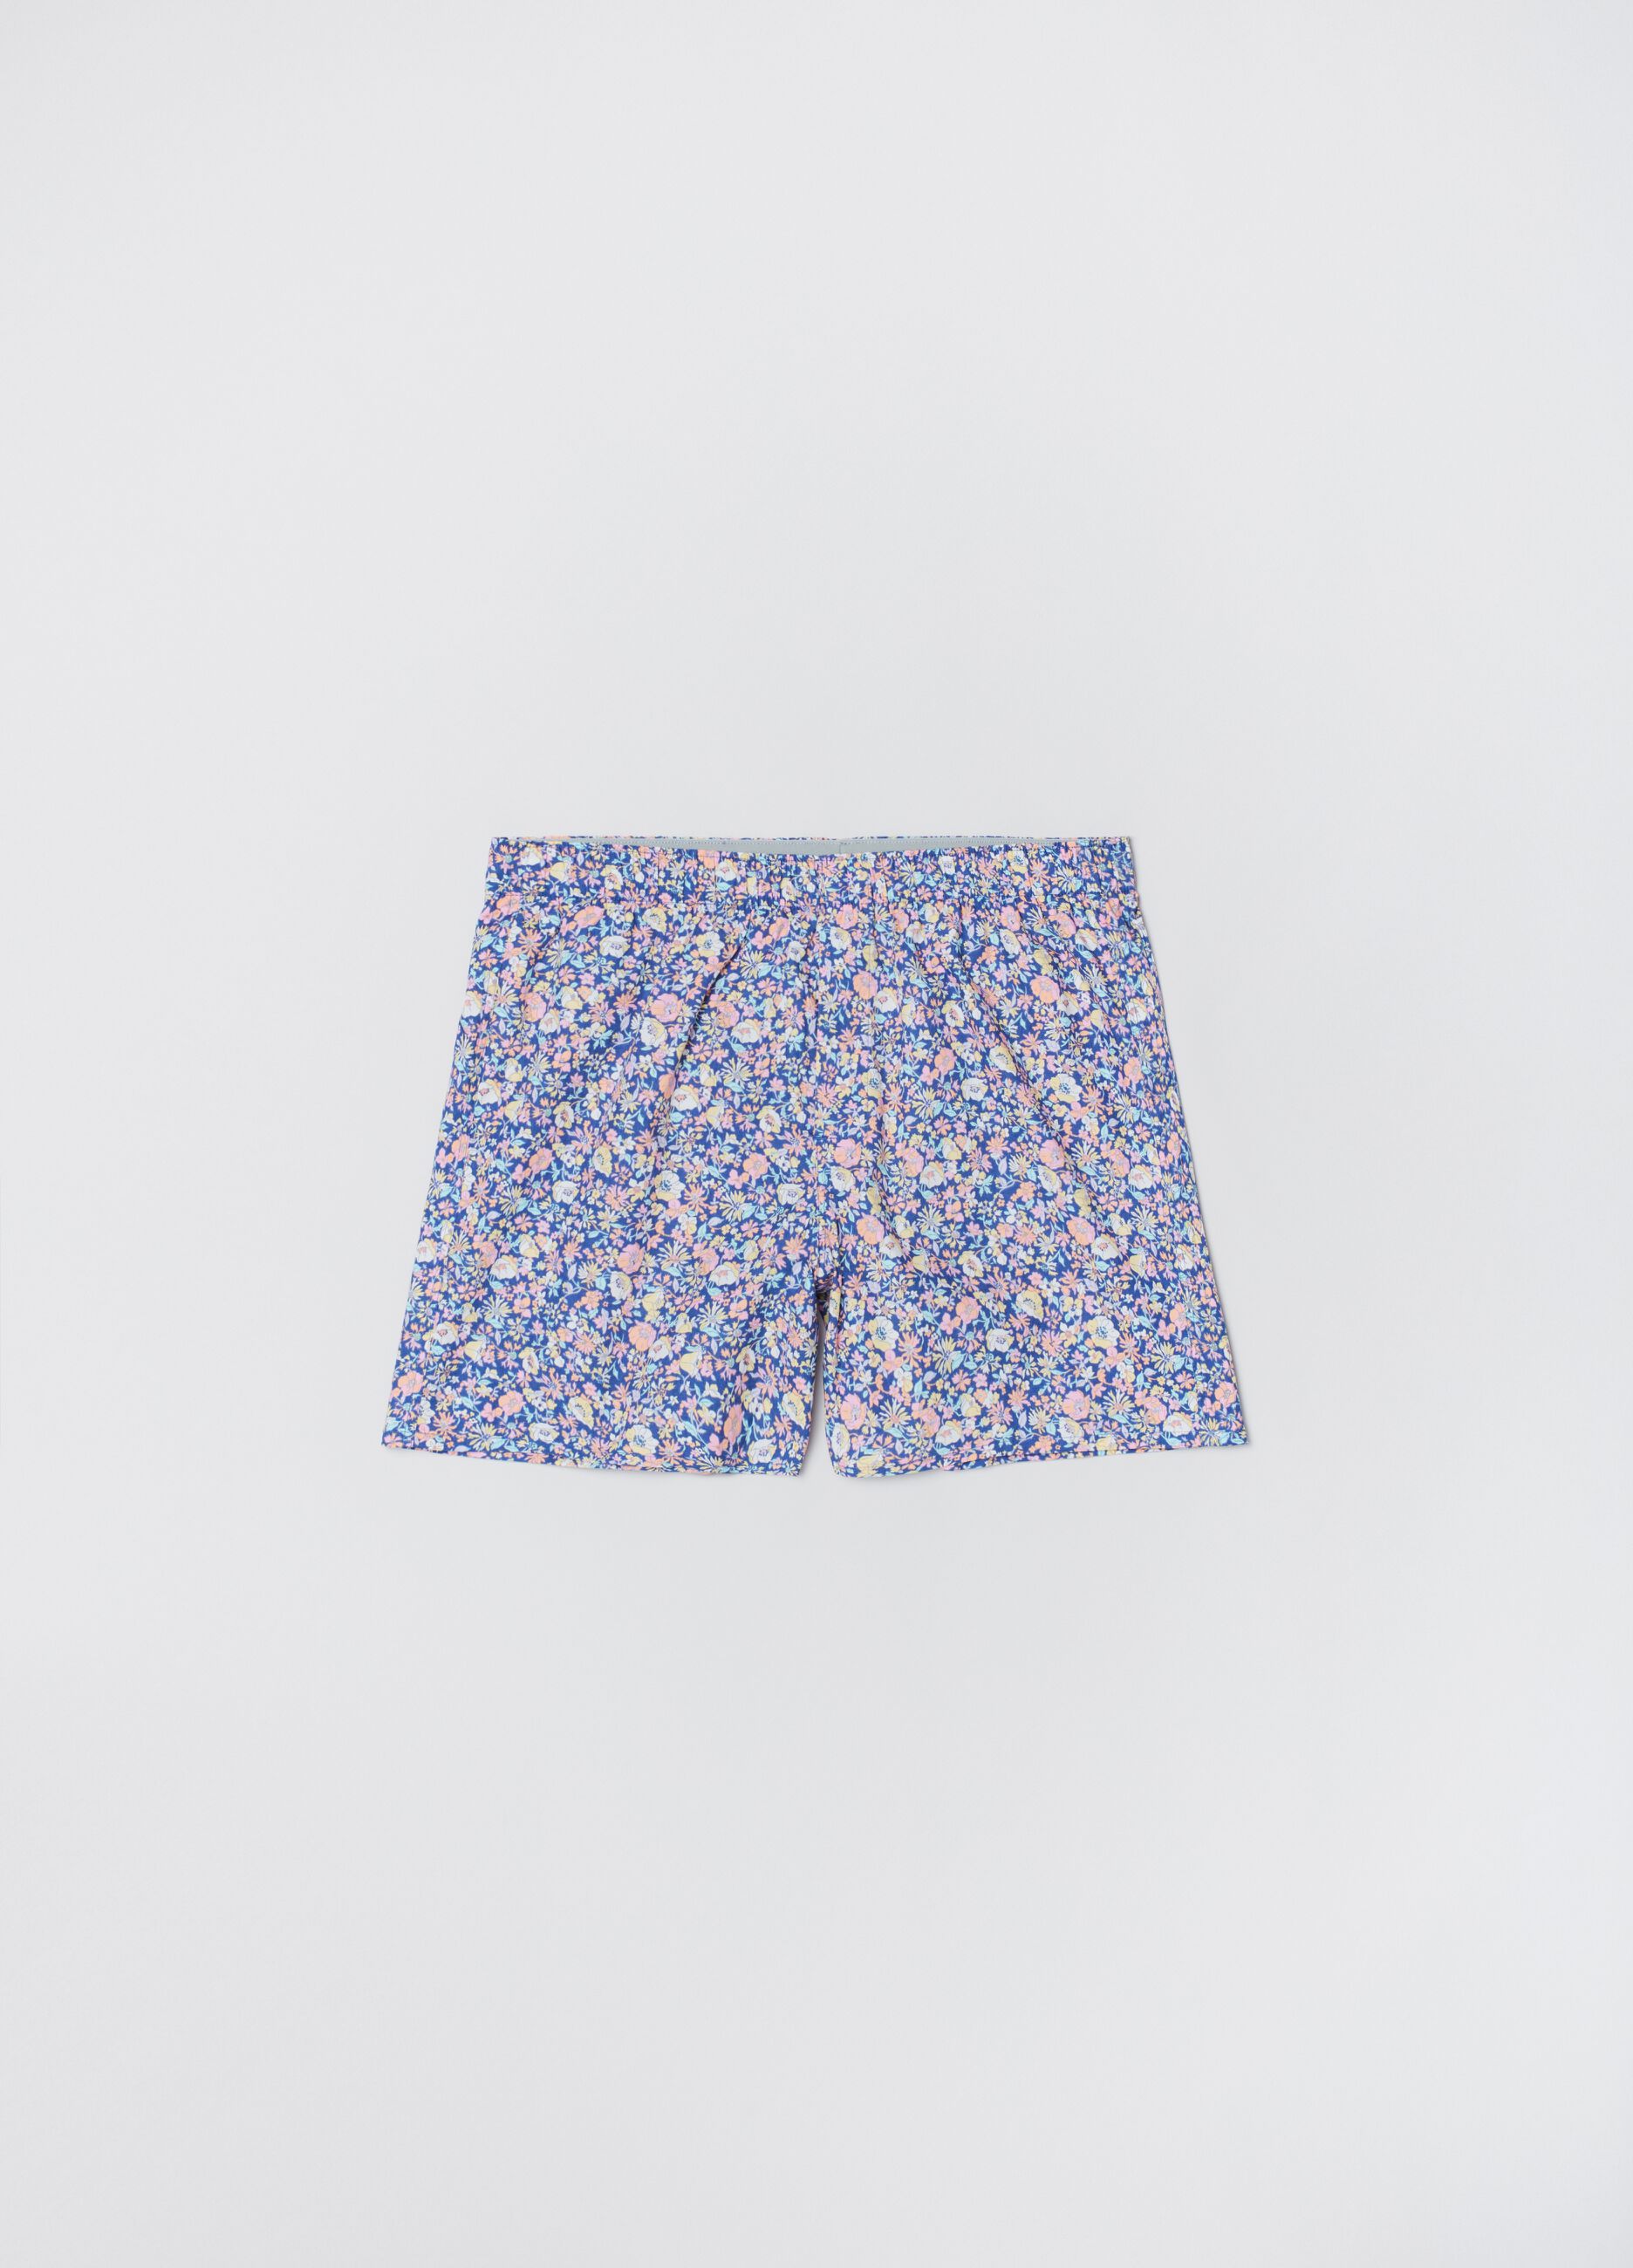 Cotton boxer shorts with floral print